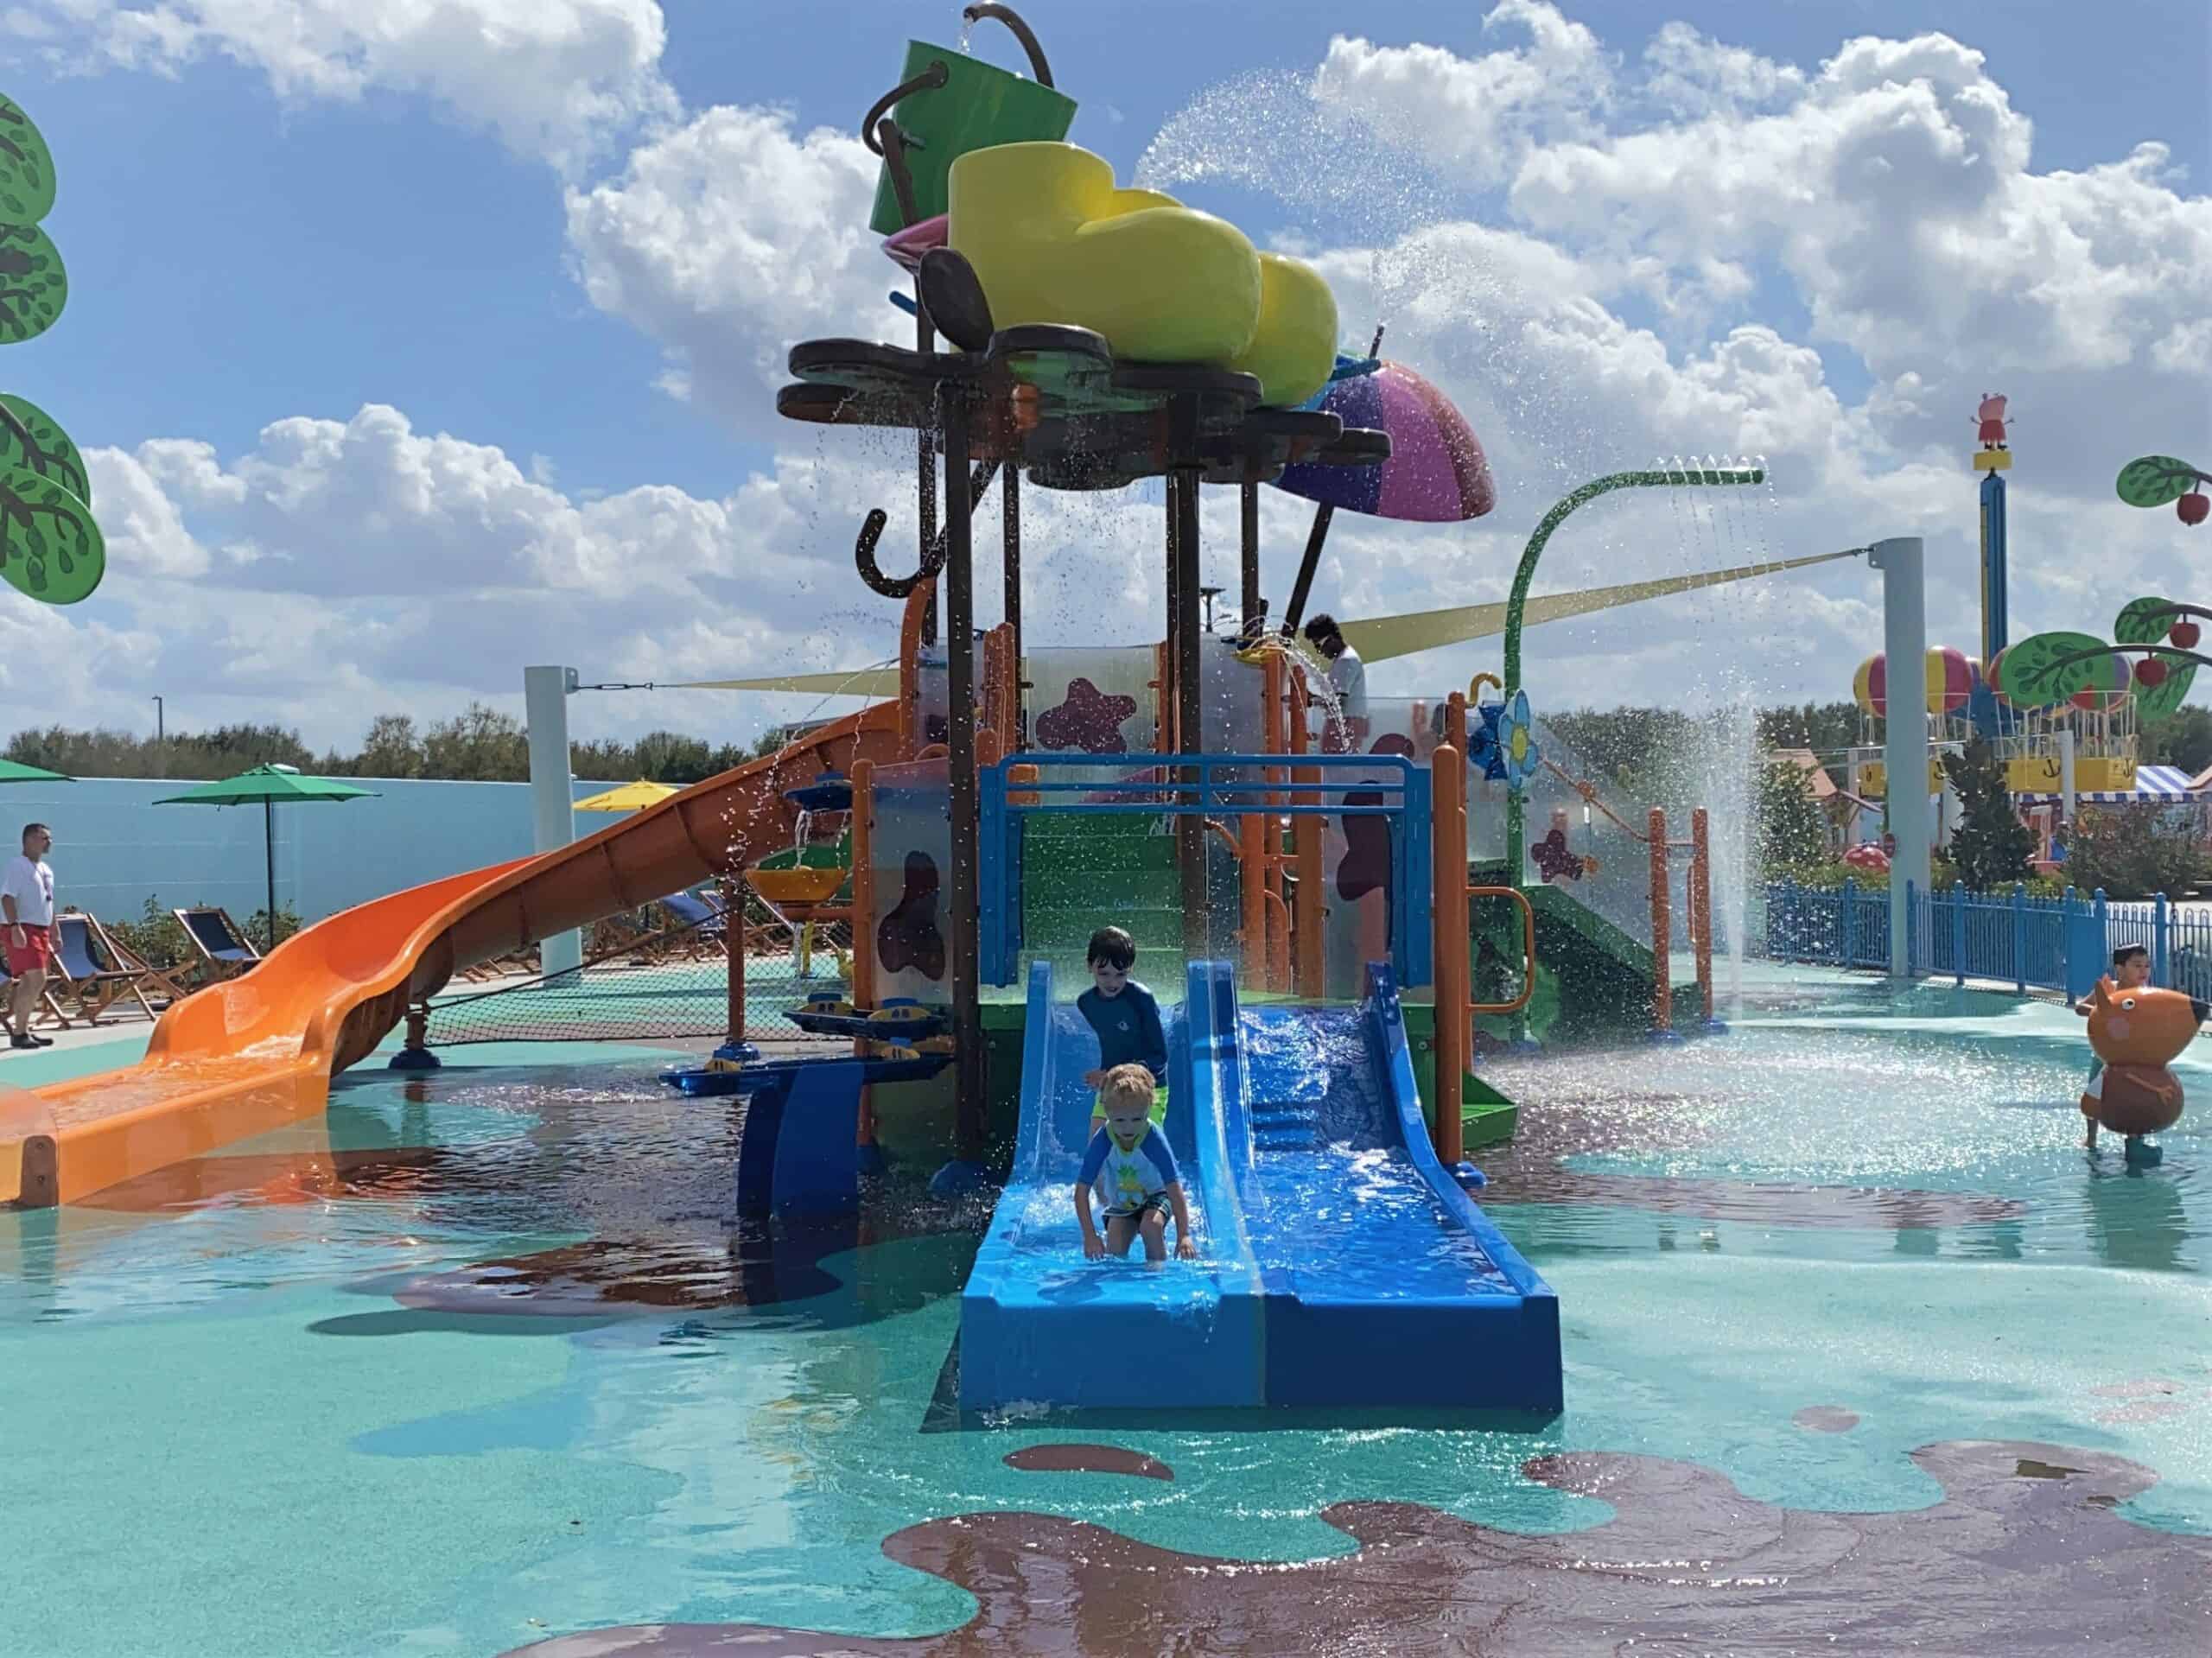 This photo shows the multiple waterslides and fountains at Muddy Puddles Splash Pad at Peppa Pig Theme Park